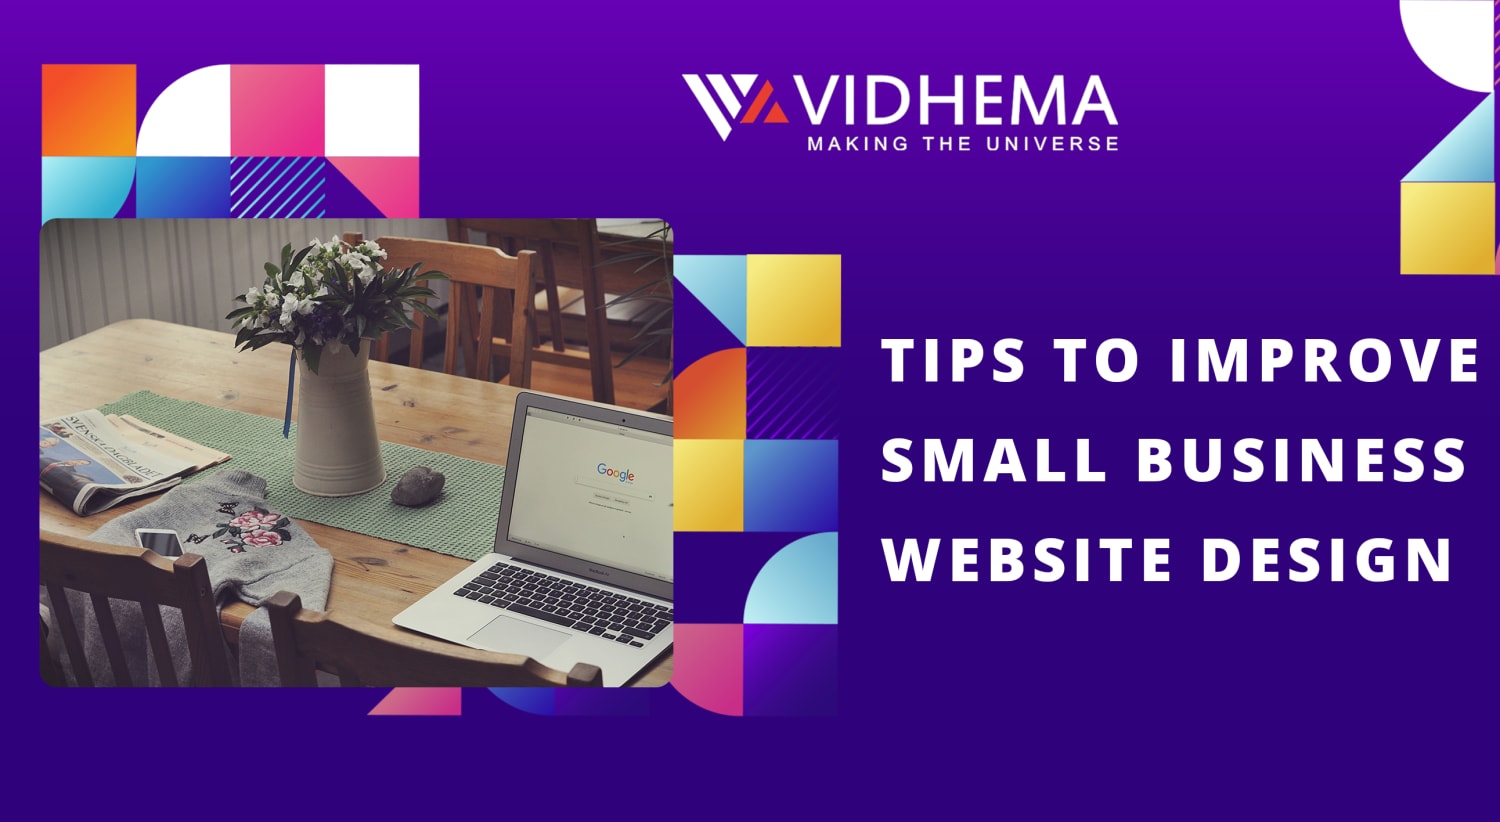 Tips to Improve Small Business Website Design